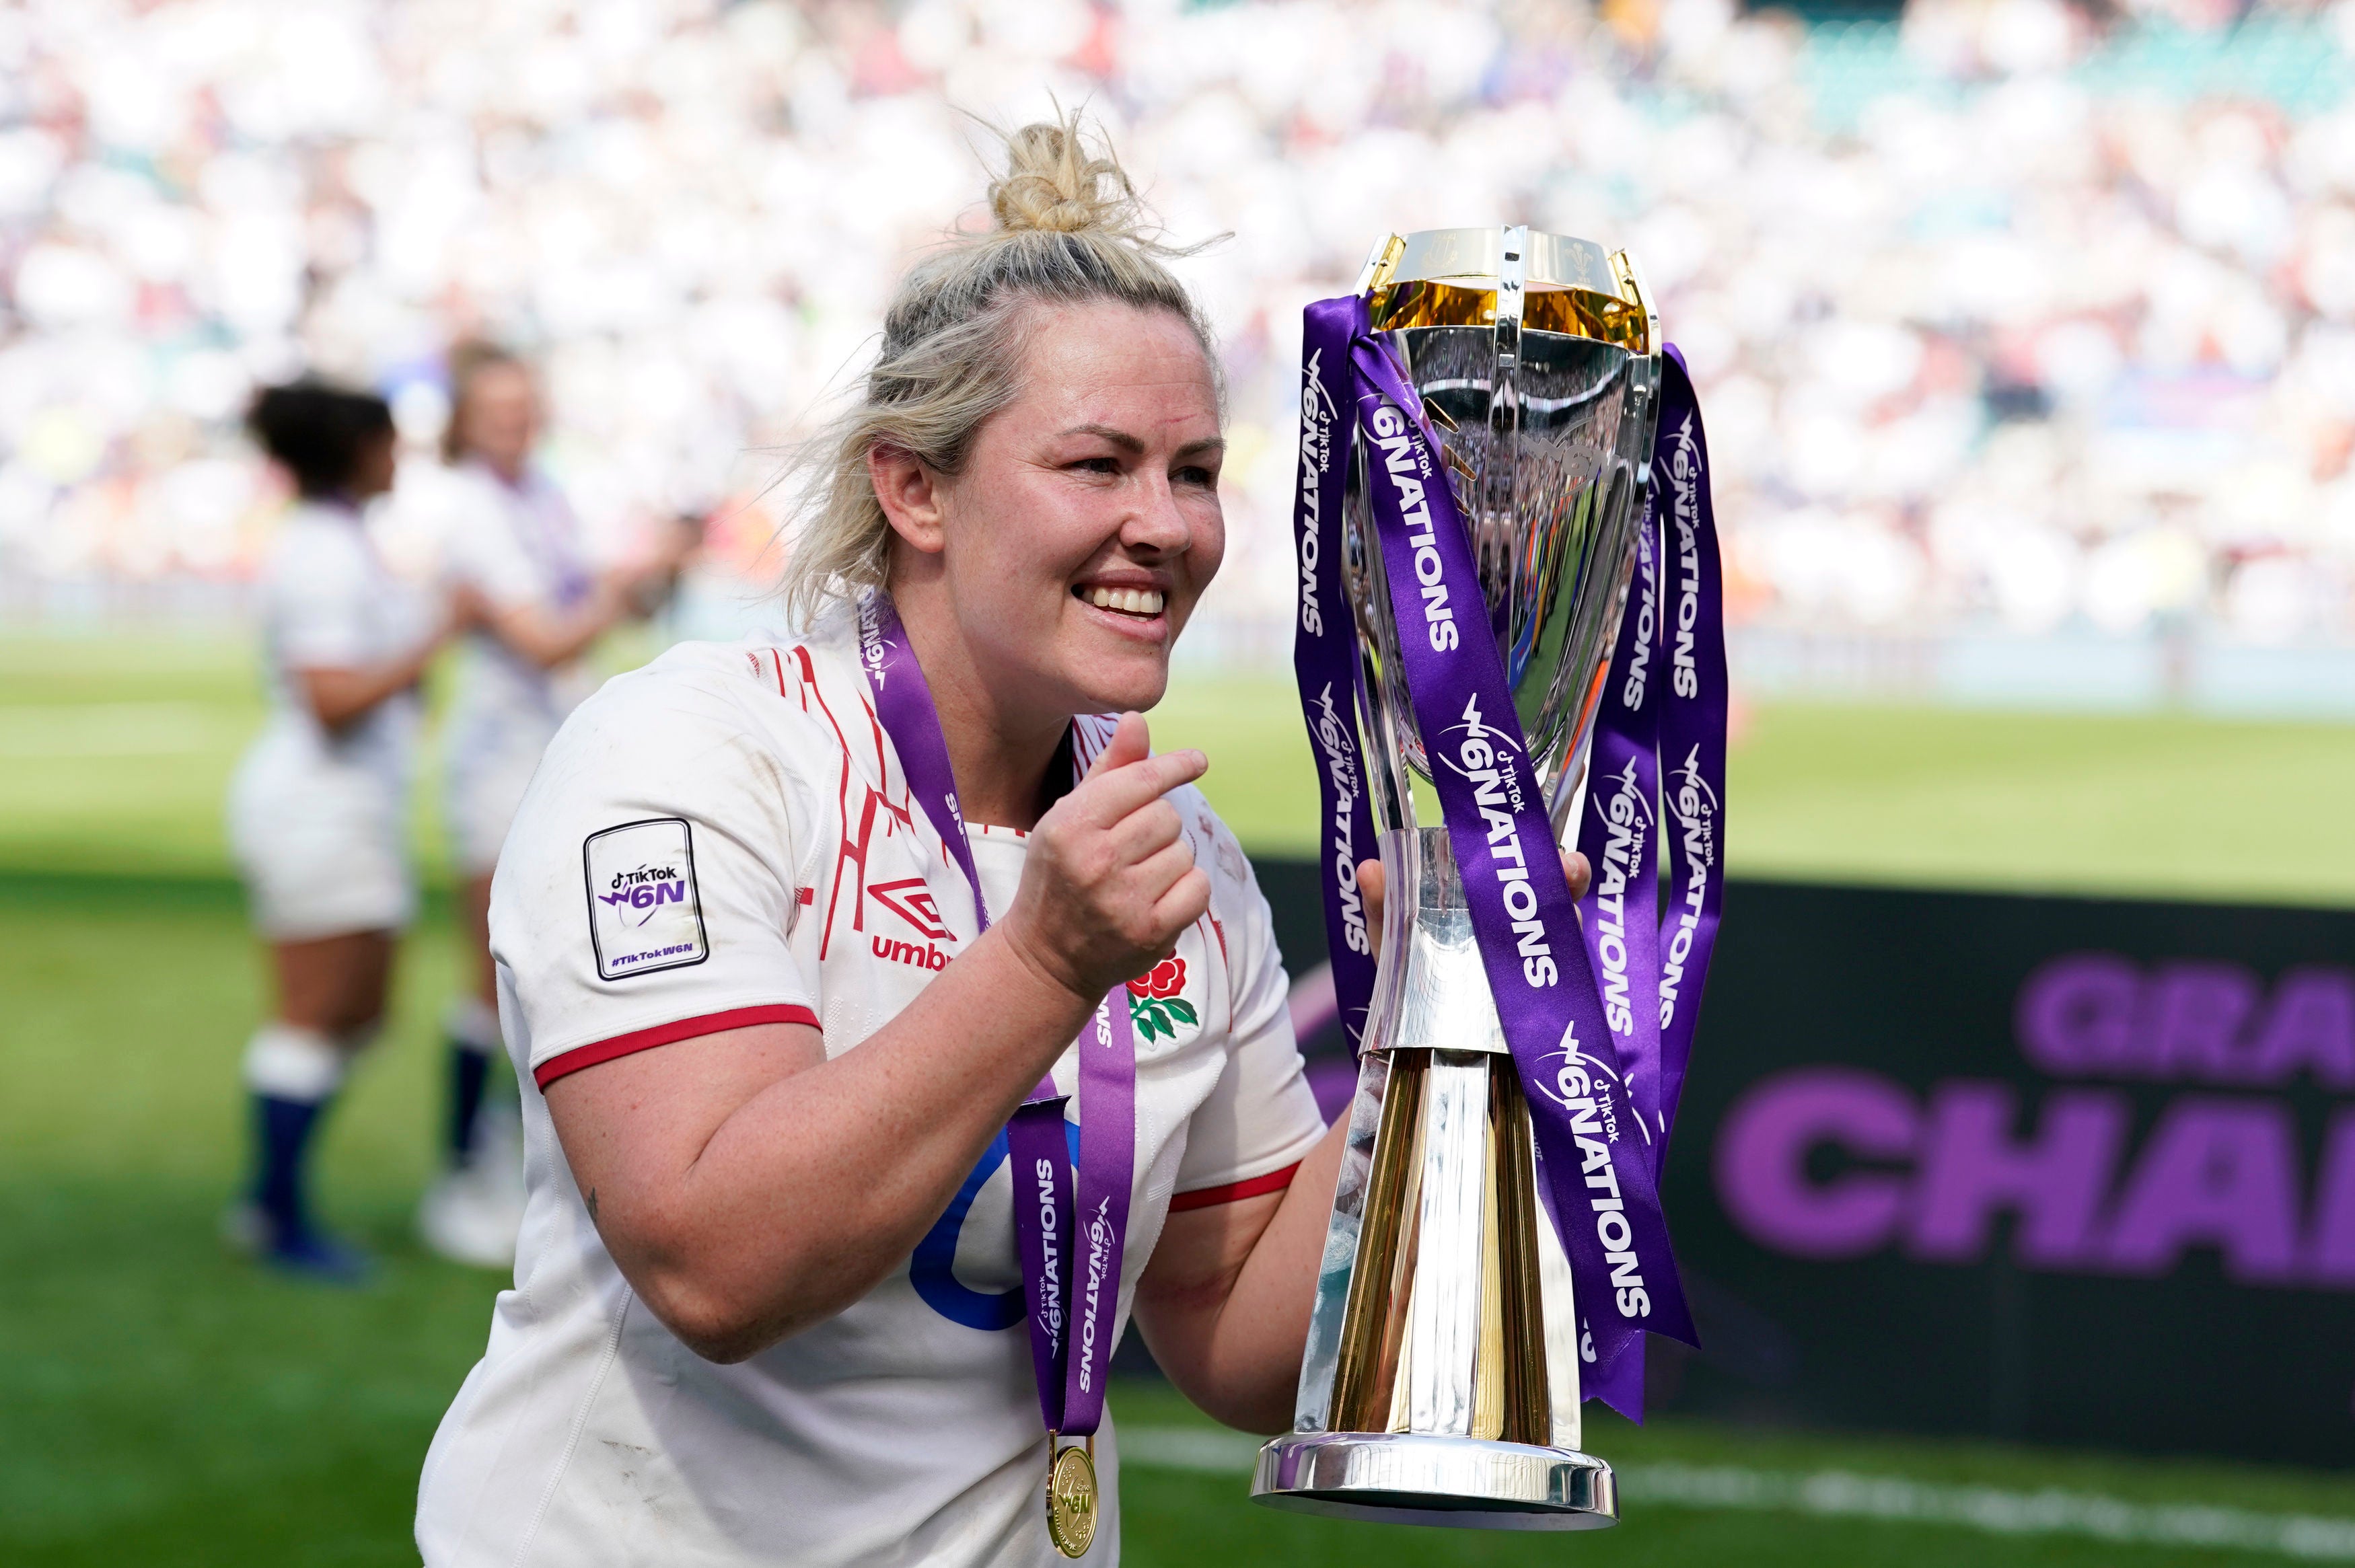 Marlie Packer led England out at Twickenham in front of the biggest crowd in women’s rugby history